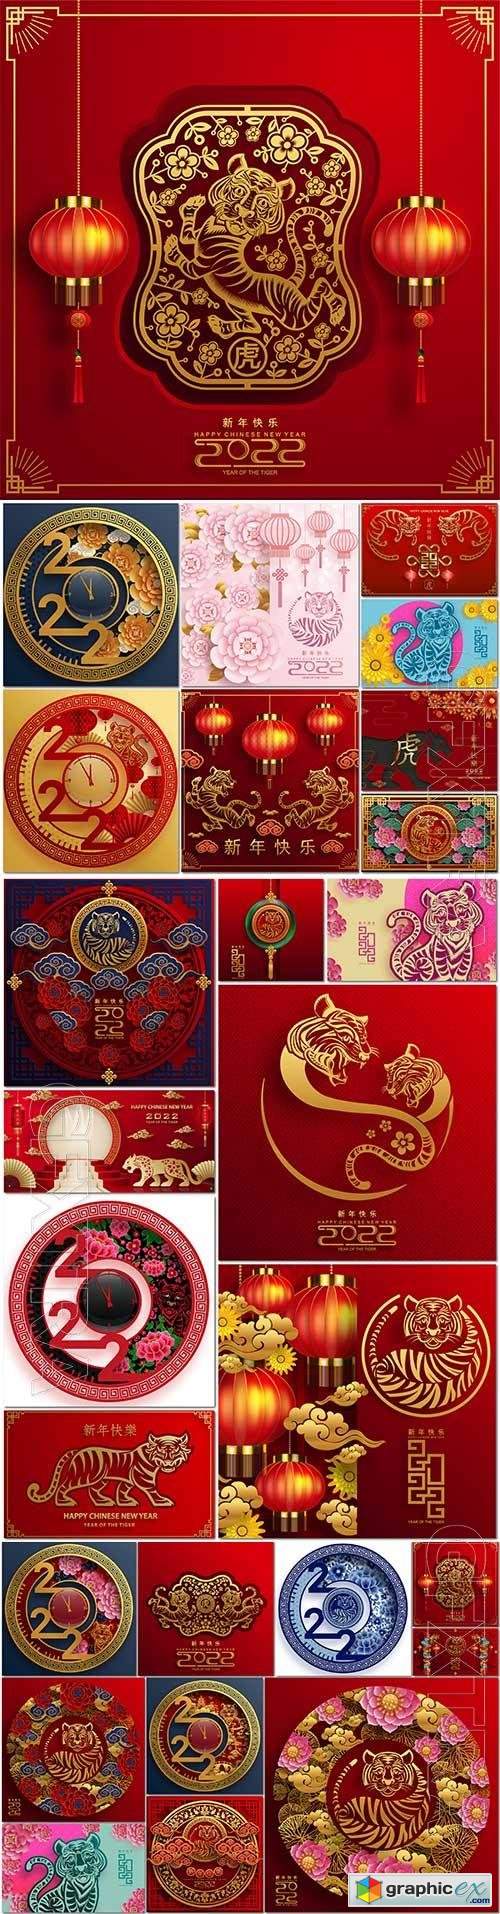  Chinese new year 2022 year of the tiger vector illustration 